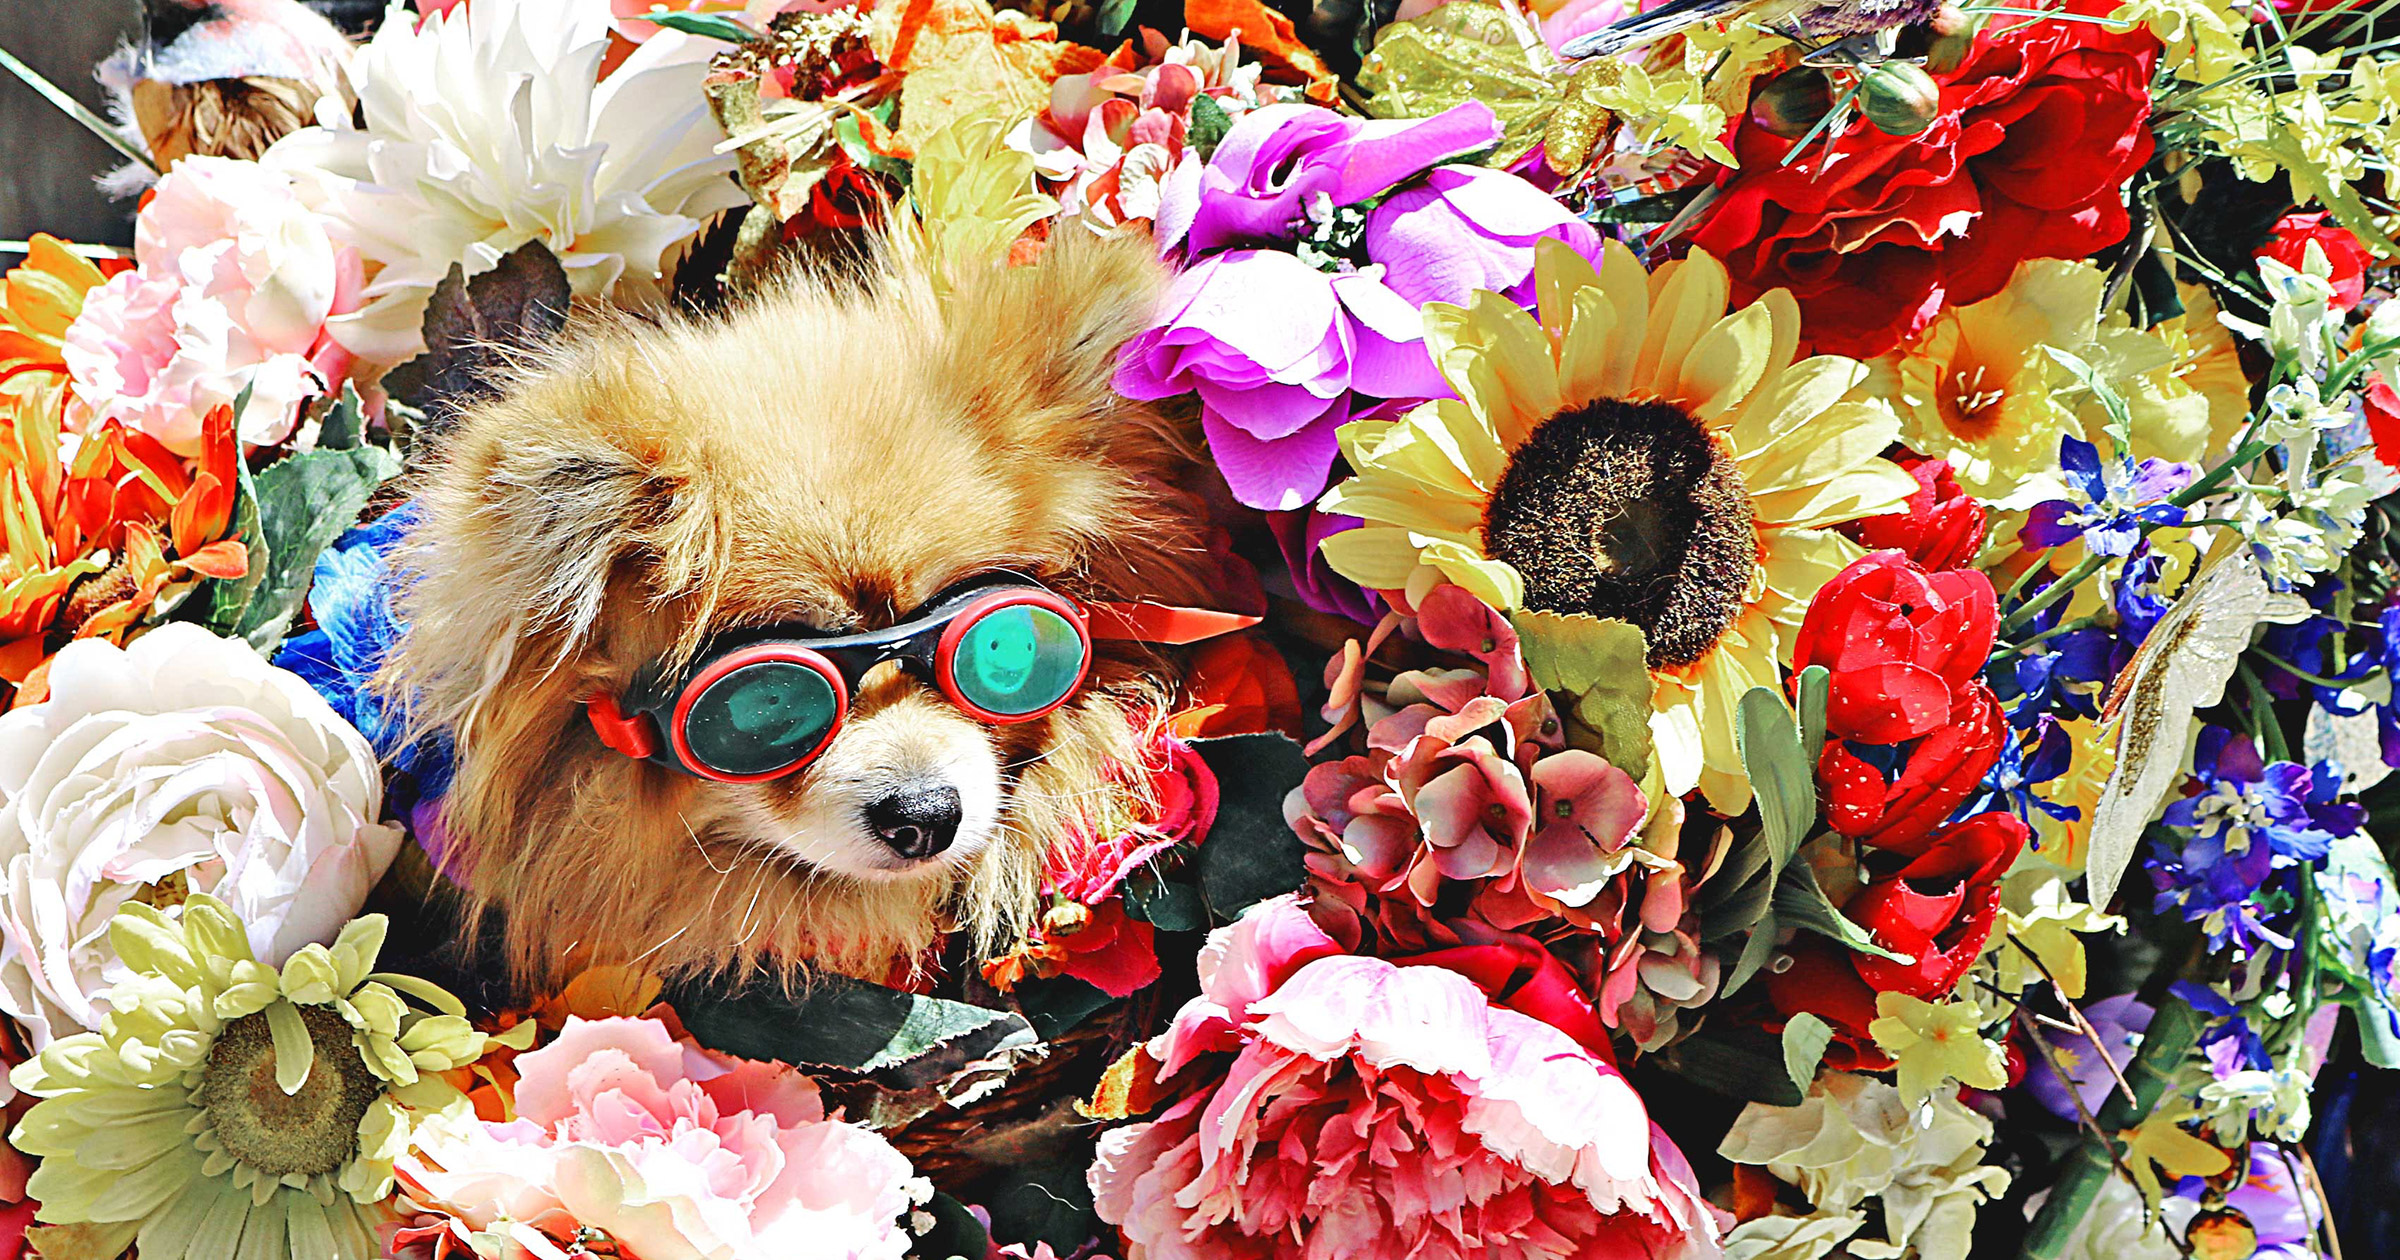 Dog and Flowers